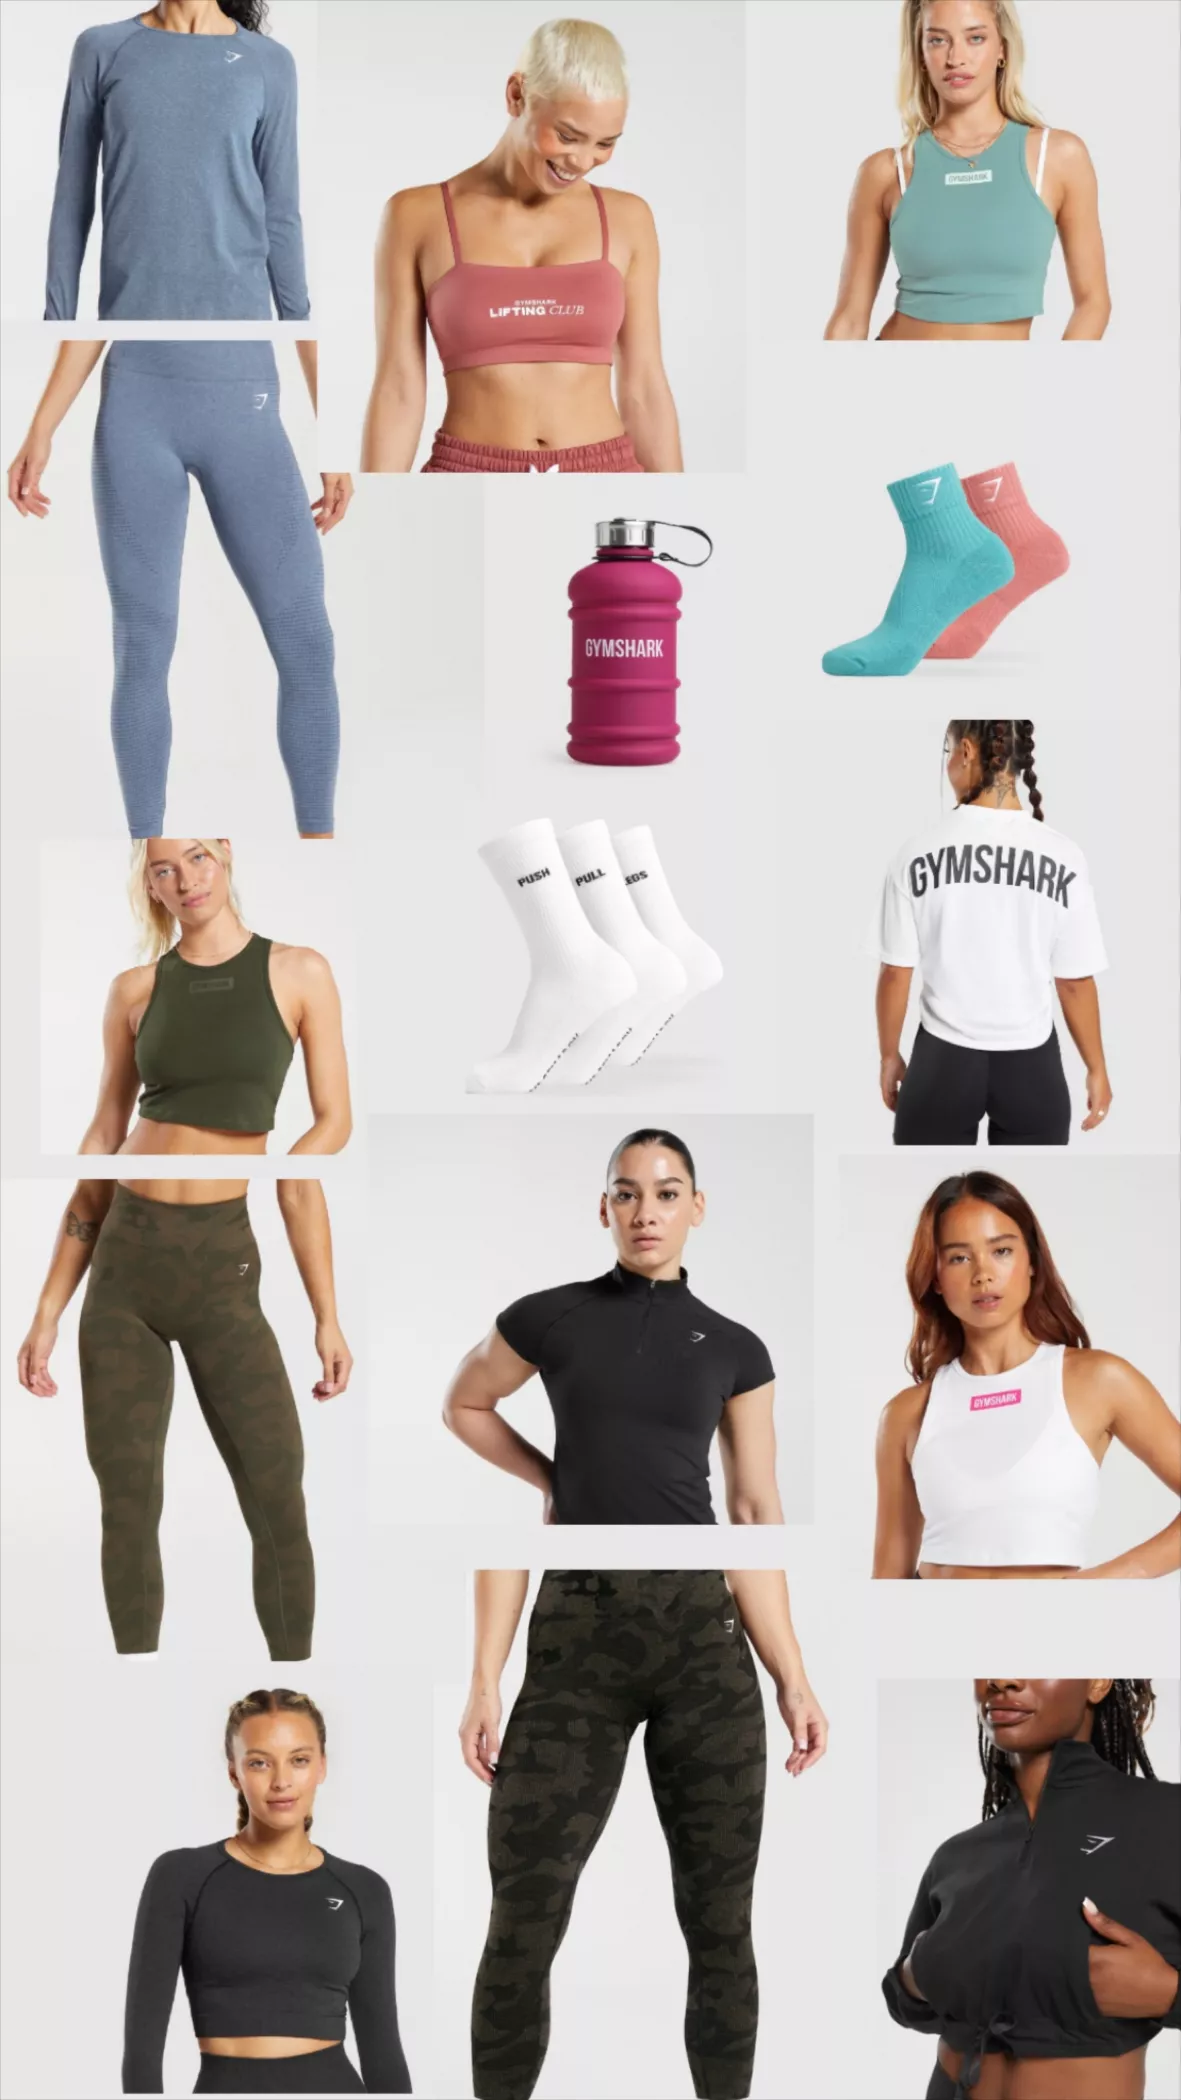 Workout Clothes - News, Tips & Guides